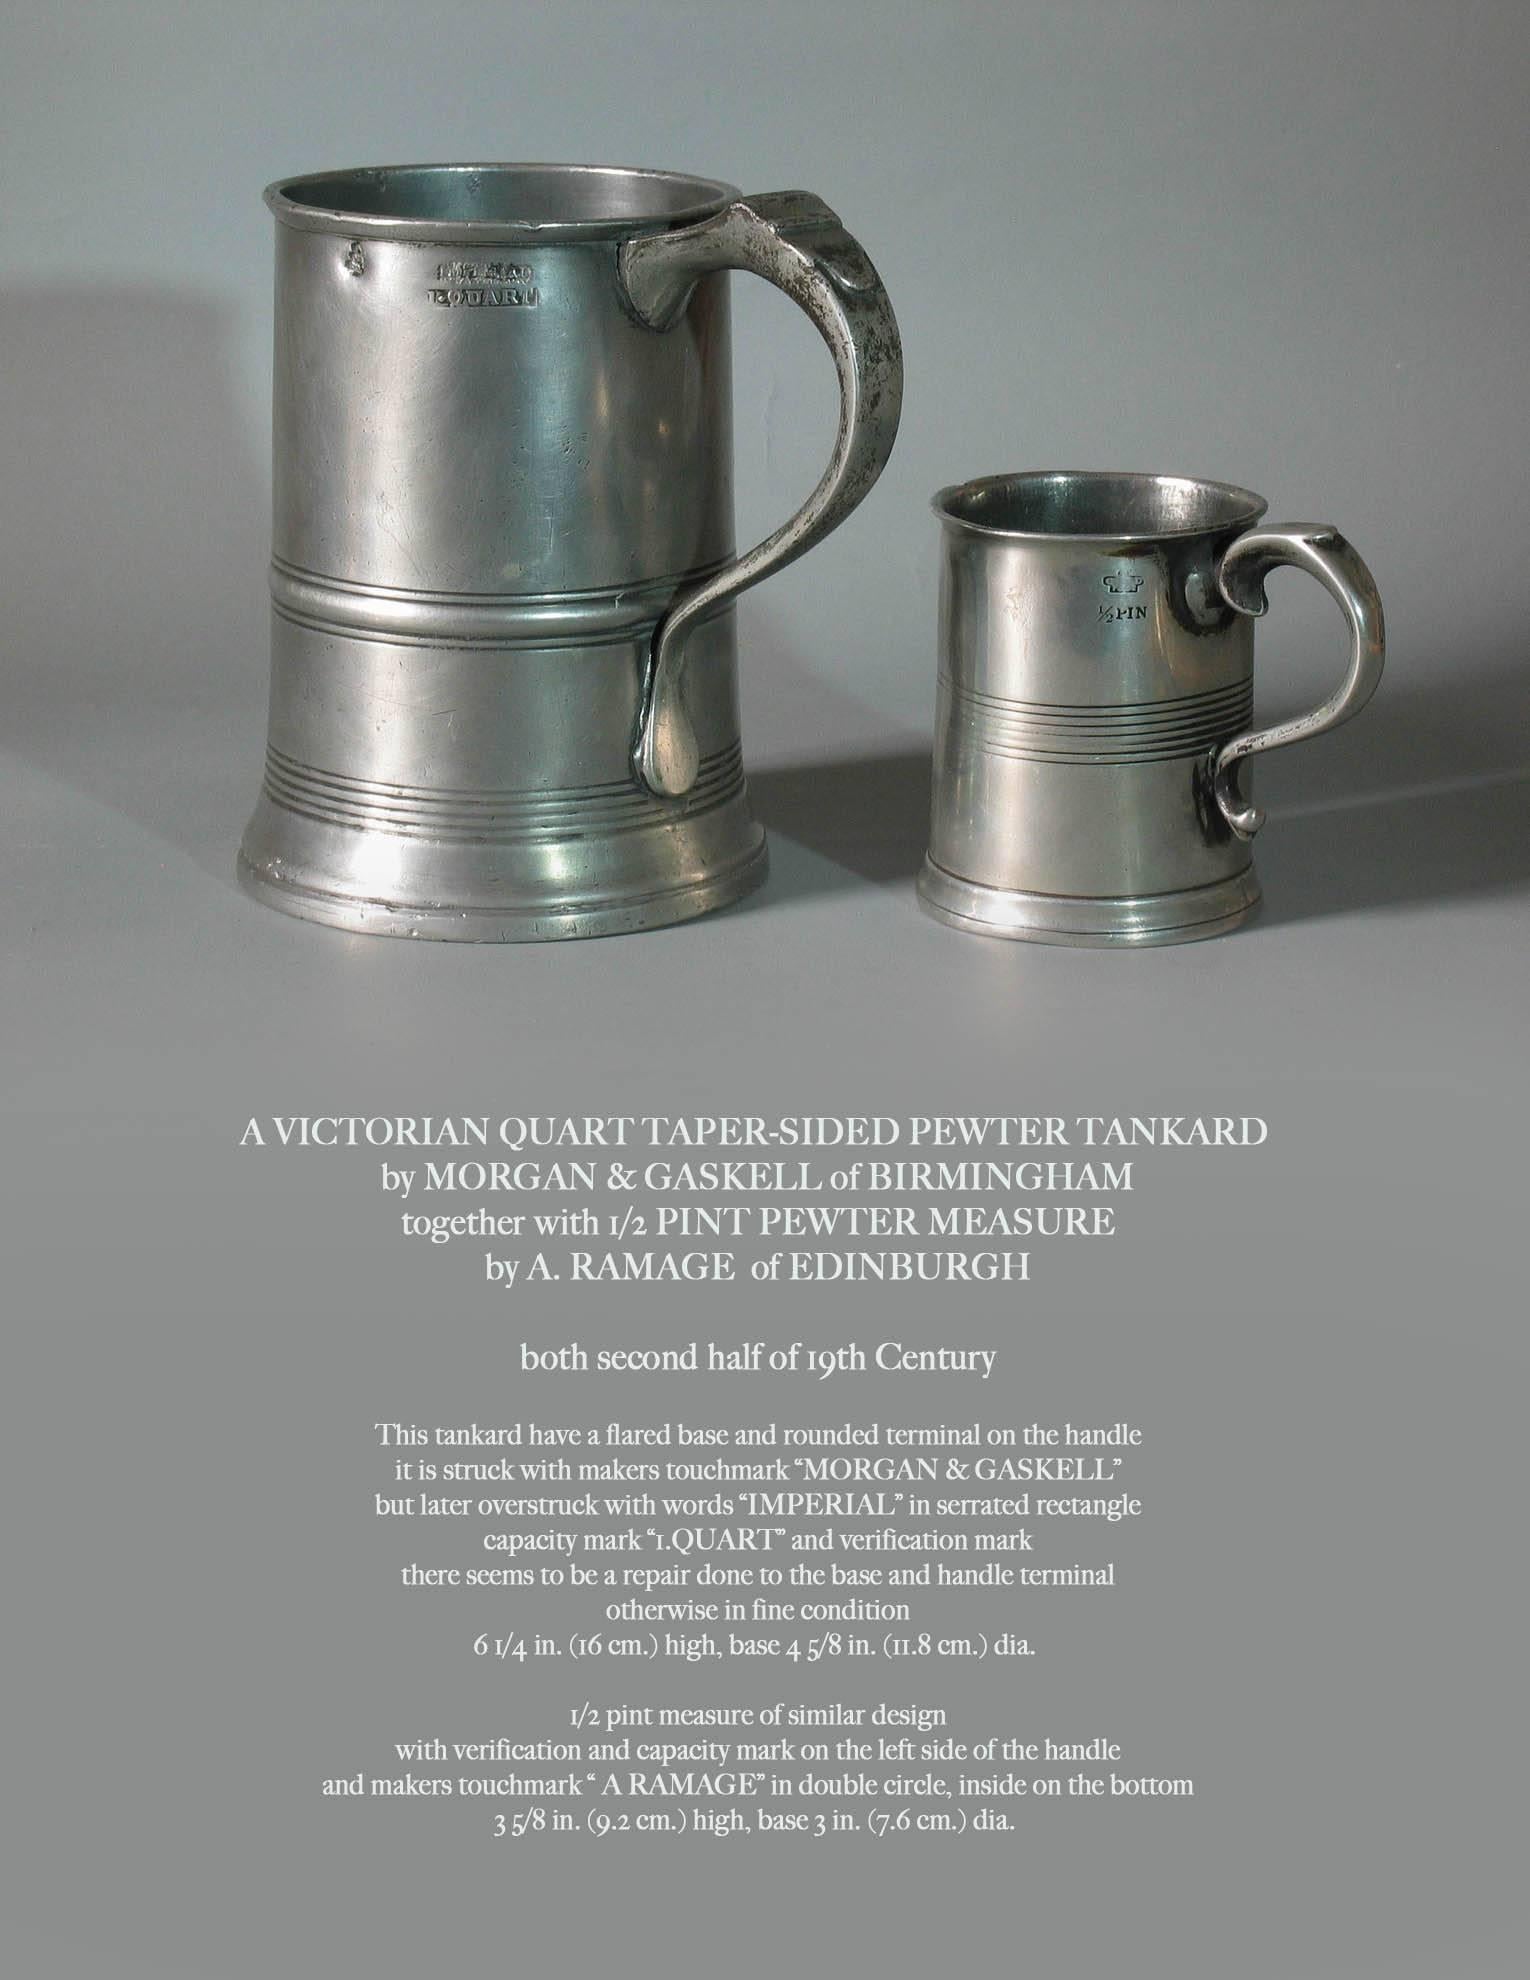 A Victorian quart taper-sided pewter tankard by Morgan & Gaskell of Birmingham, together with 1/2 pint pewter measure by A. Ramage of Edinburgh. Both second half of the 19th century. 

This tankard having a flared base and rounded terminal on the